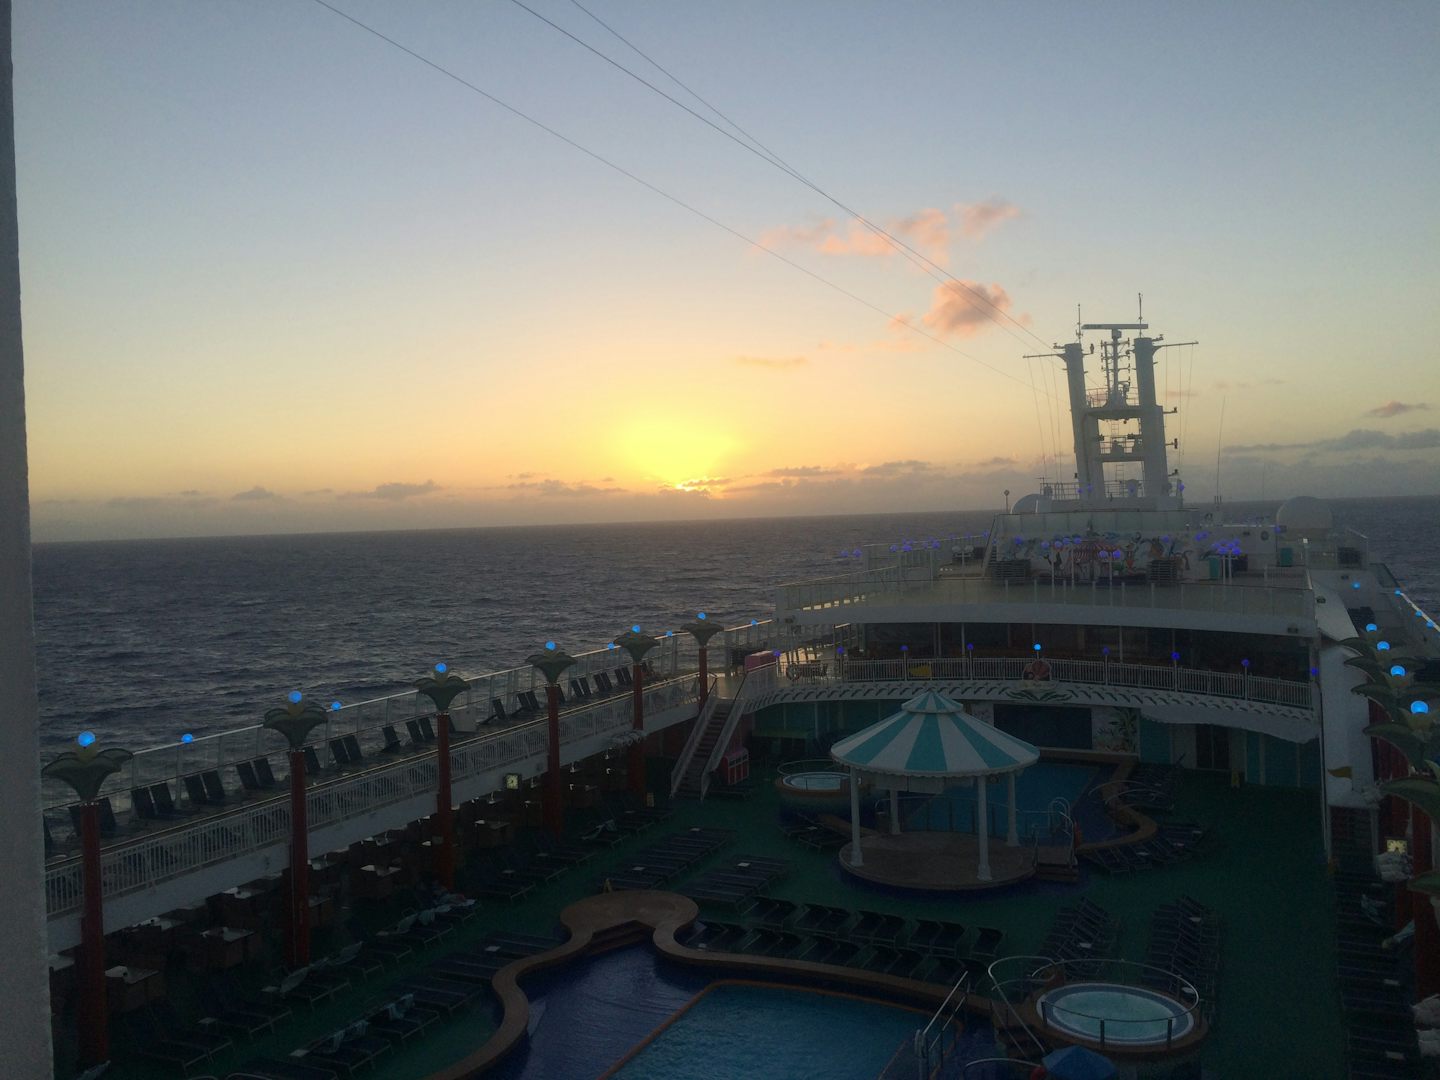 View of the sunrise out of our stateroom